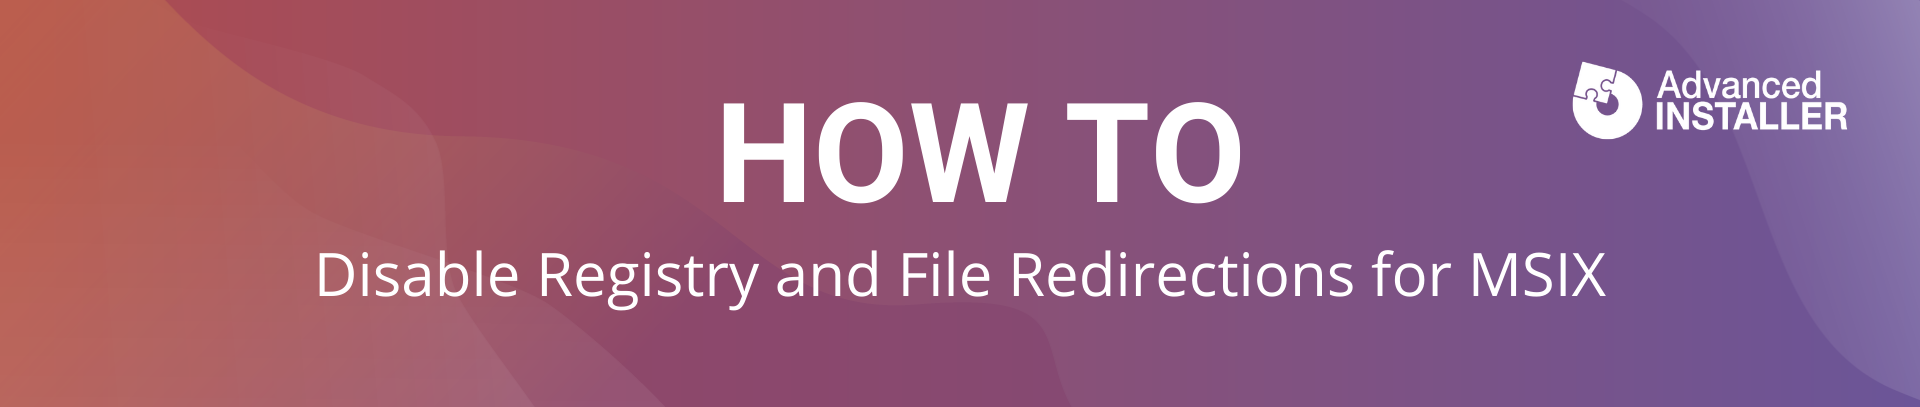 How to disable registry and file redirections